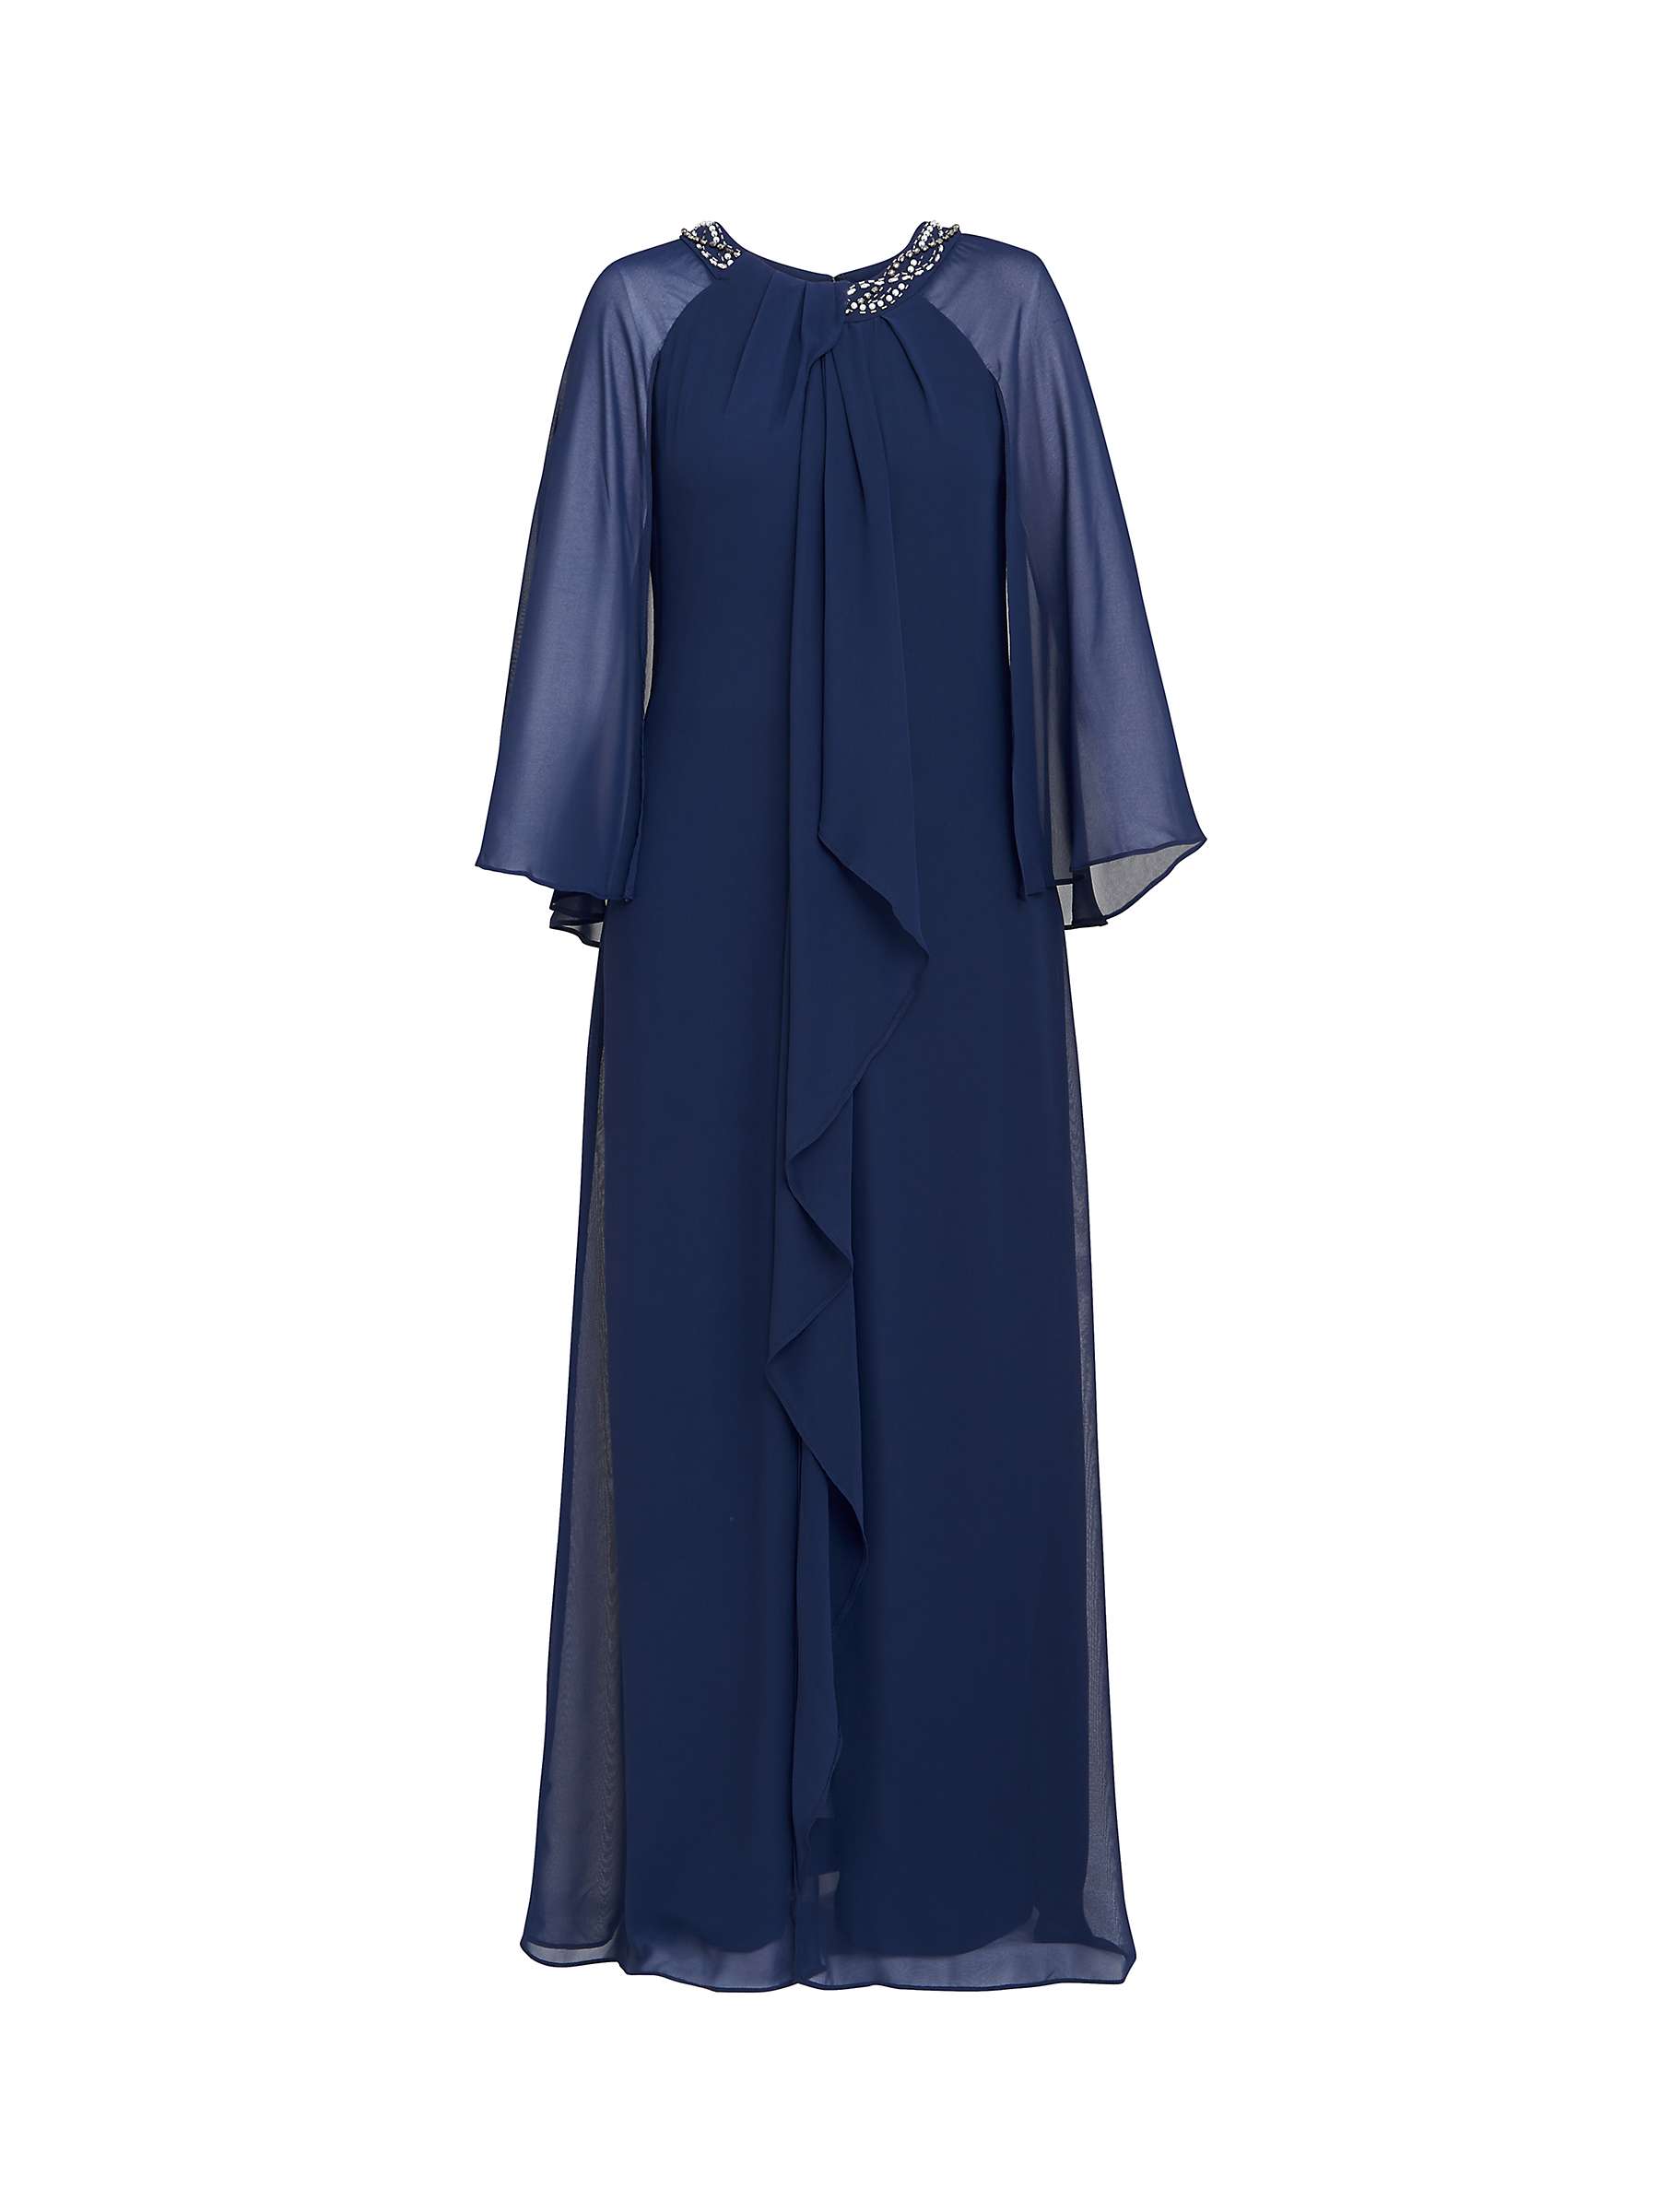 Buy Gina Bacconi Polly Maxi Dress, Navy Online at johnlewis.com